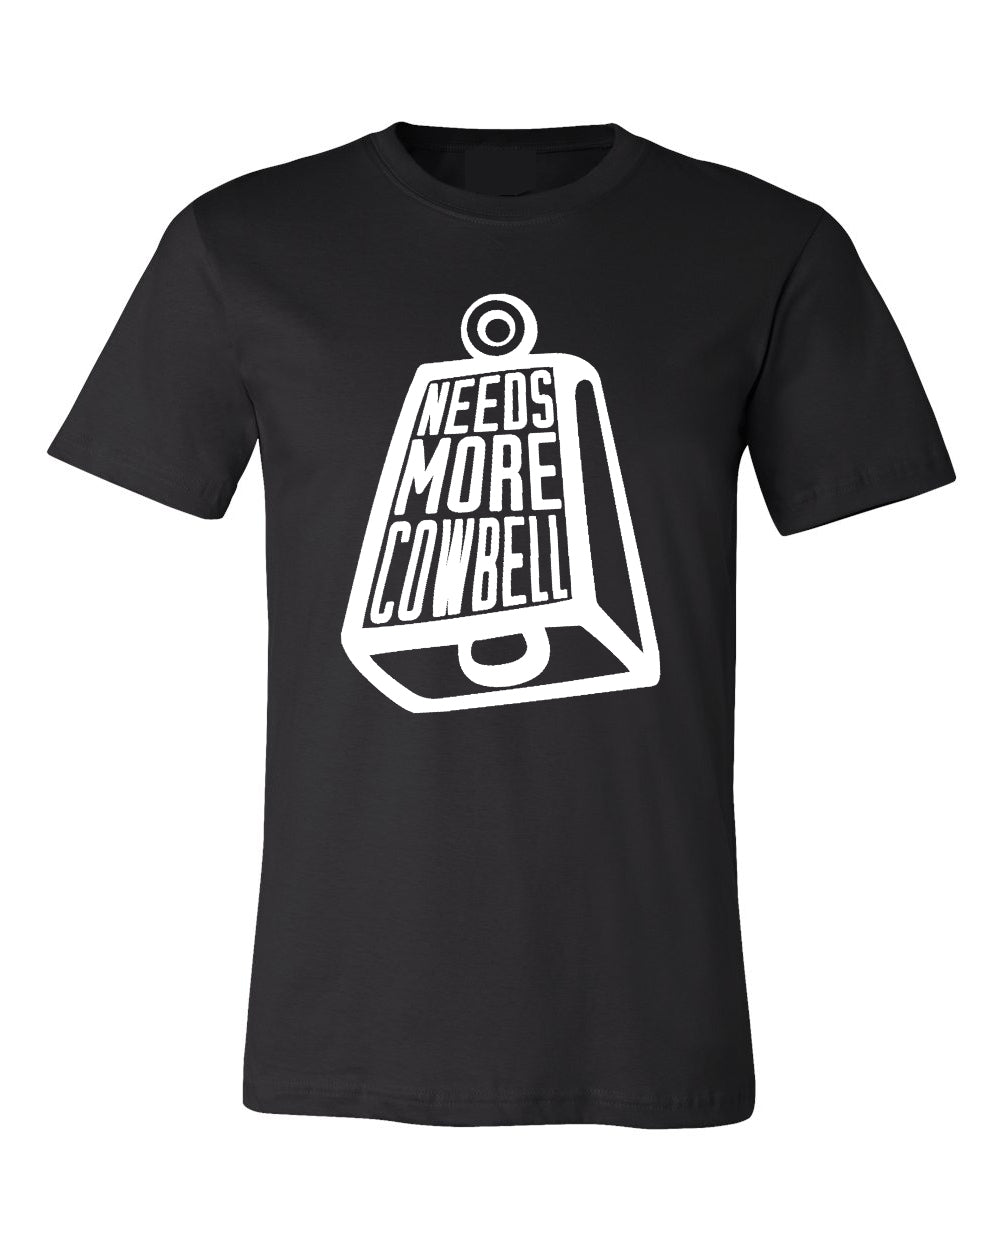 Needs More Cowbell - Tshirt